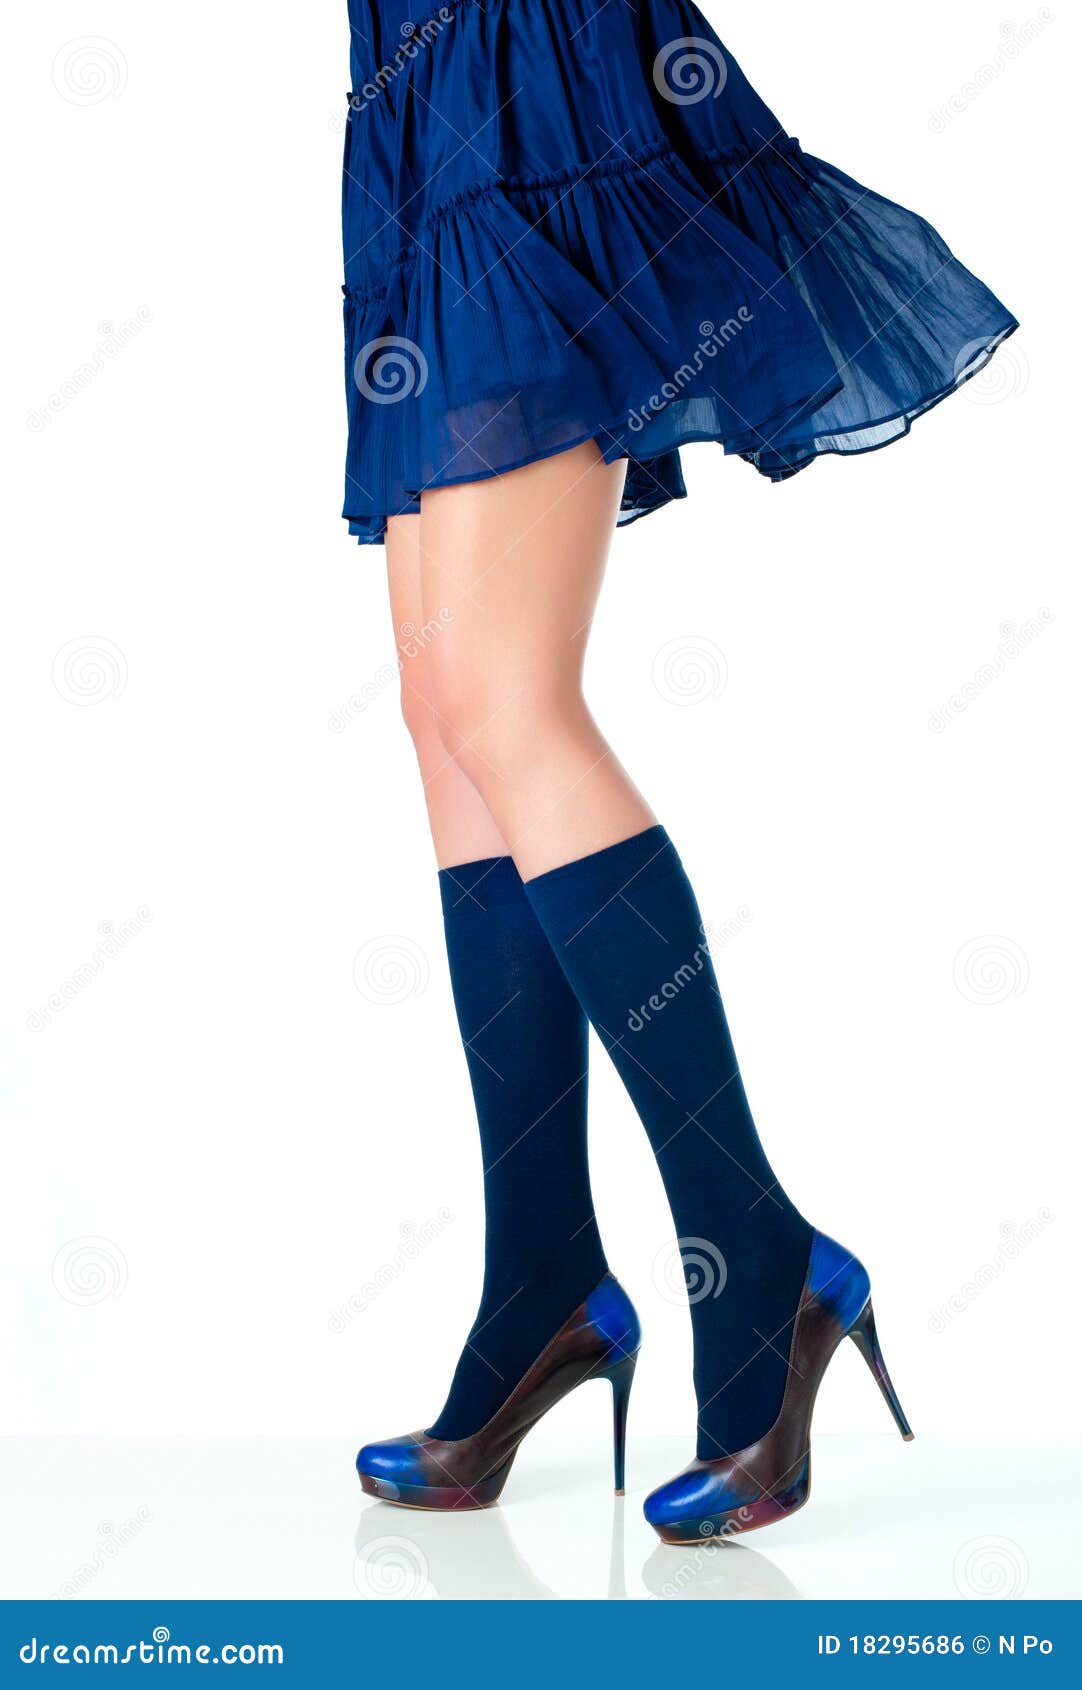 Lady in blue stock photo. Image of ankle, background - 18295686